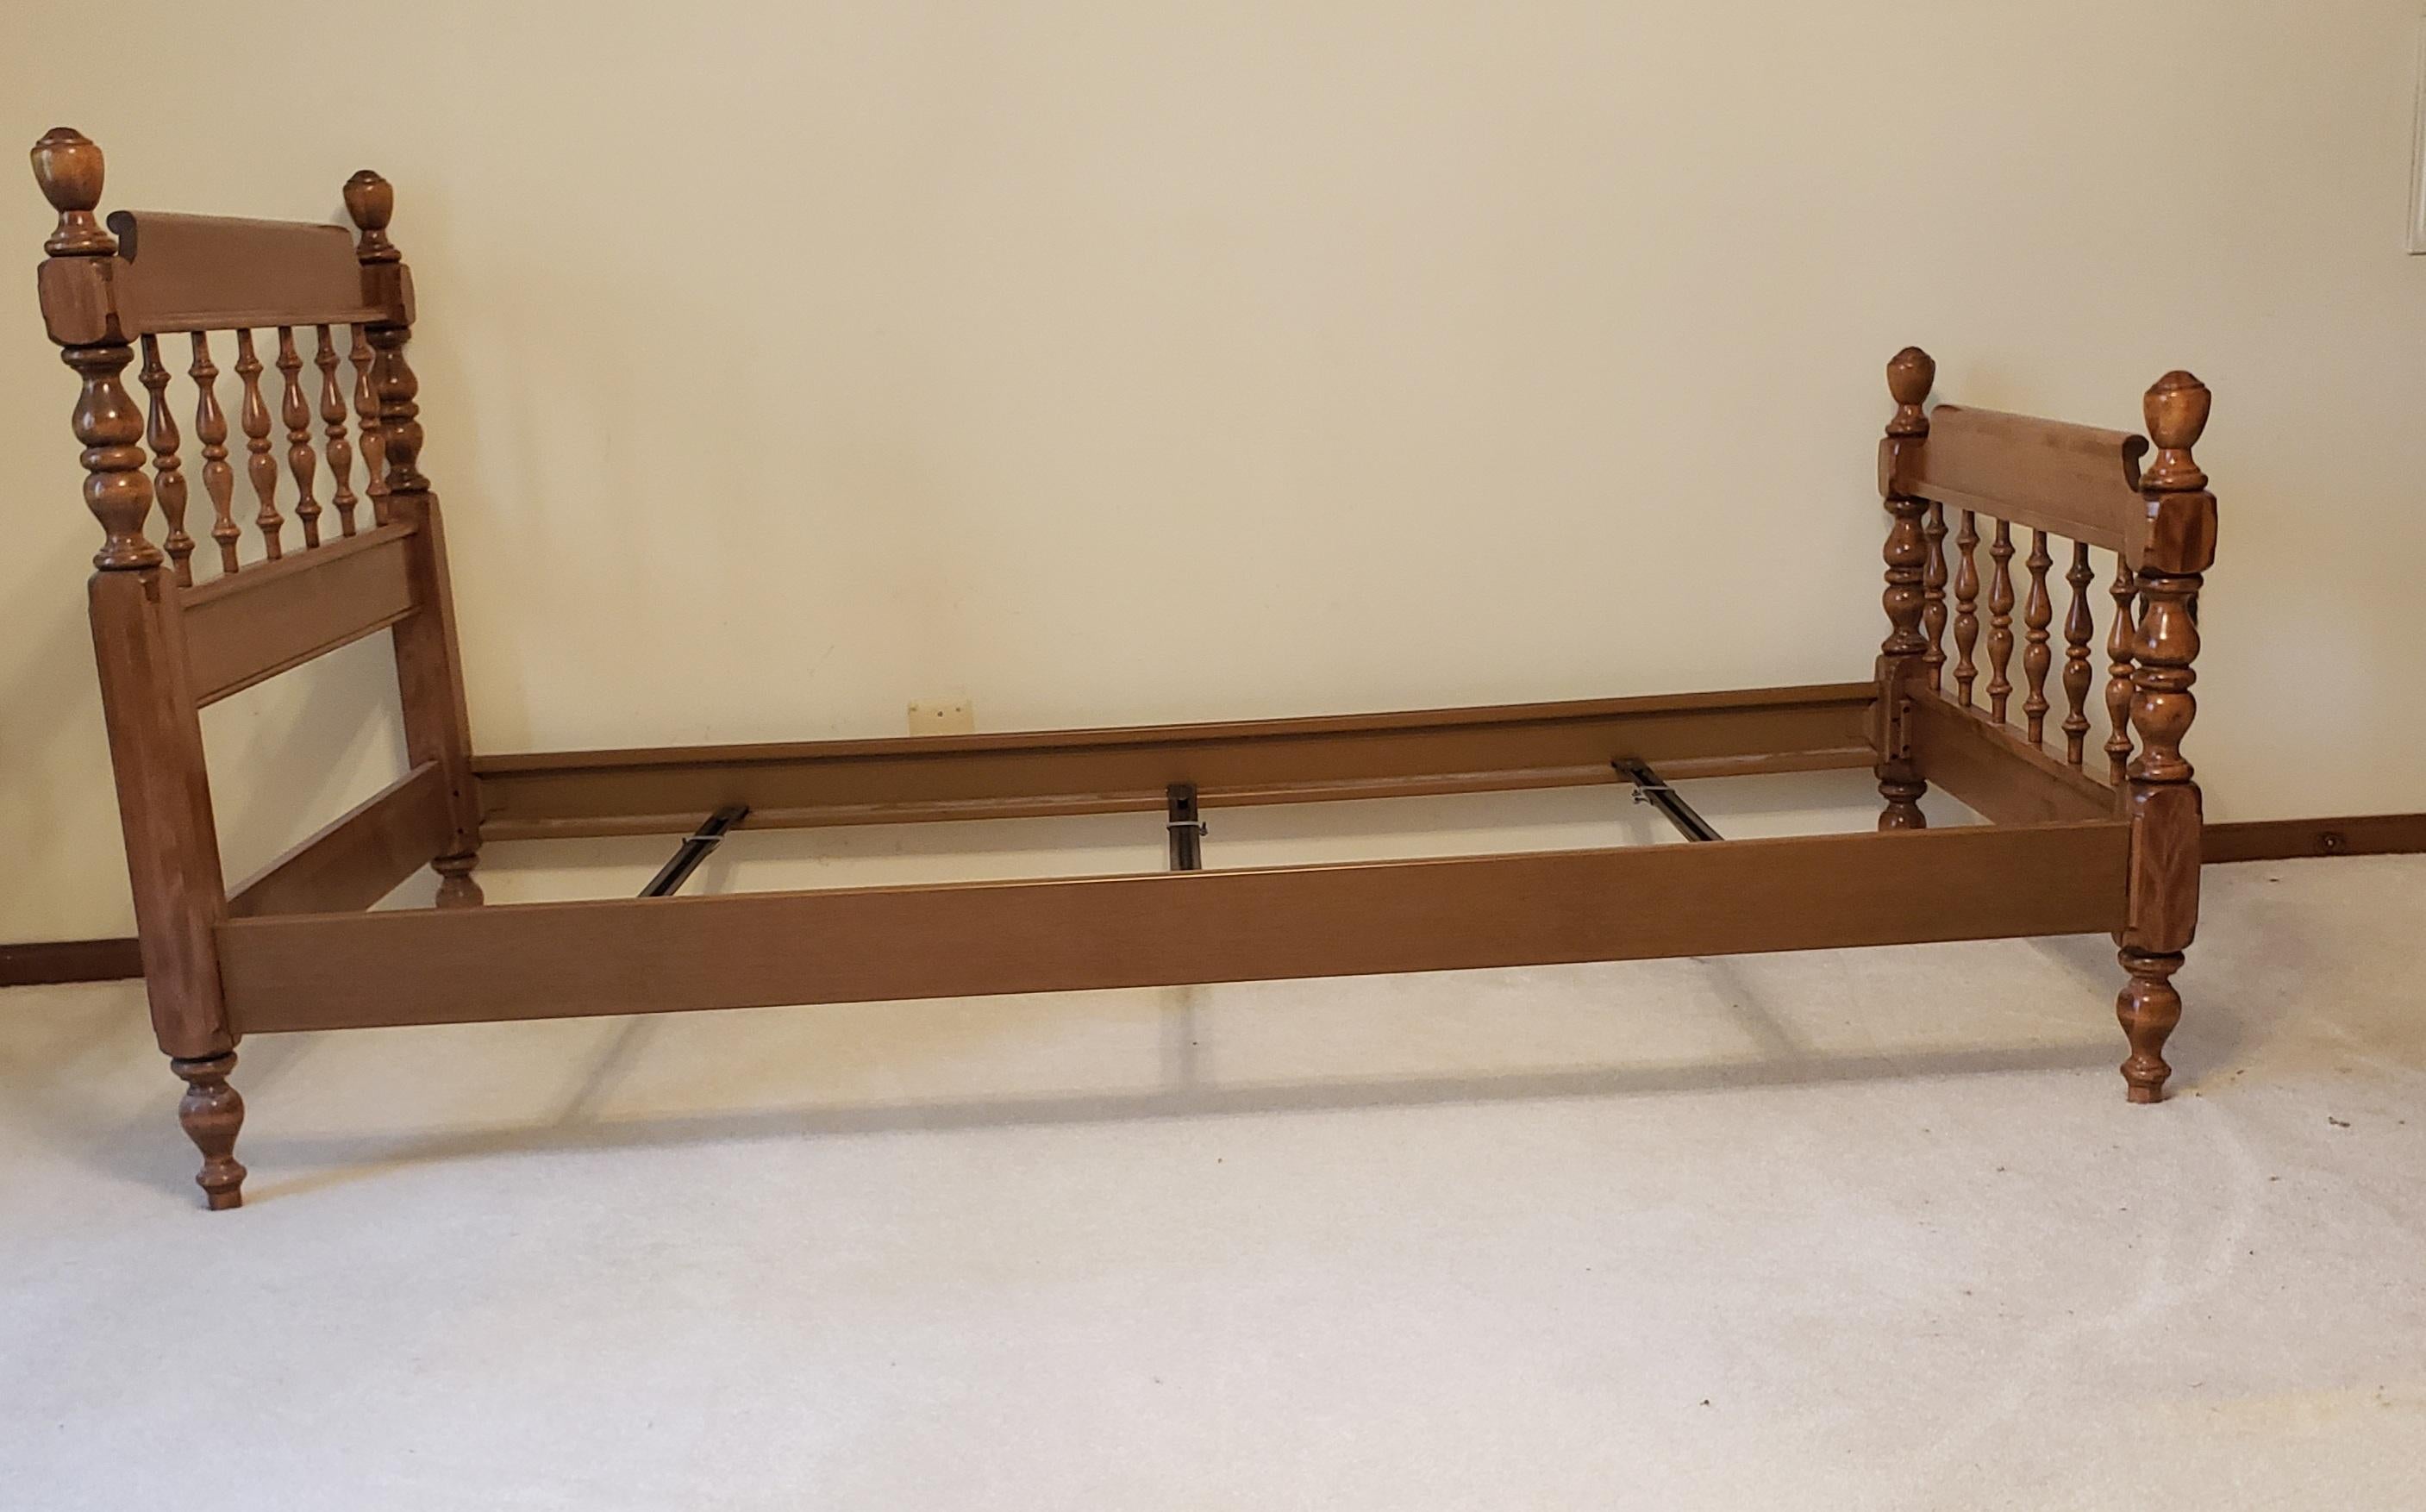 Metalwork Ethan Allen Maple Spindle Twin Beds Frames, circa 1980s